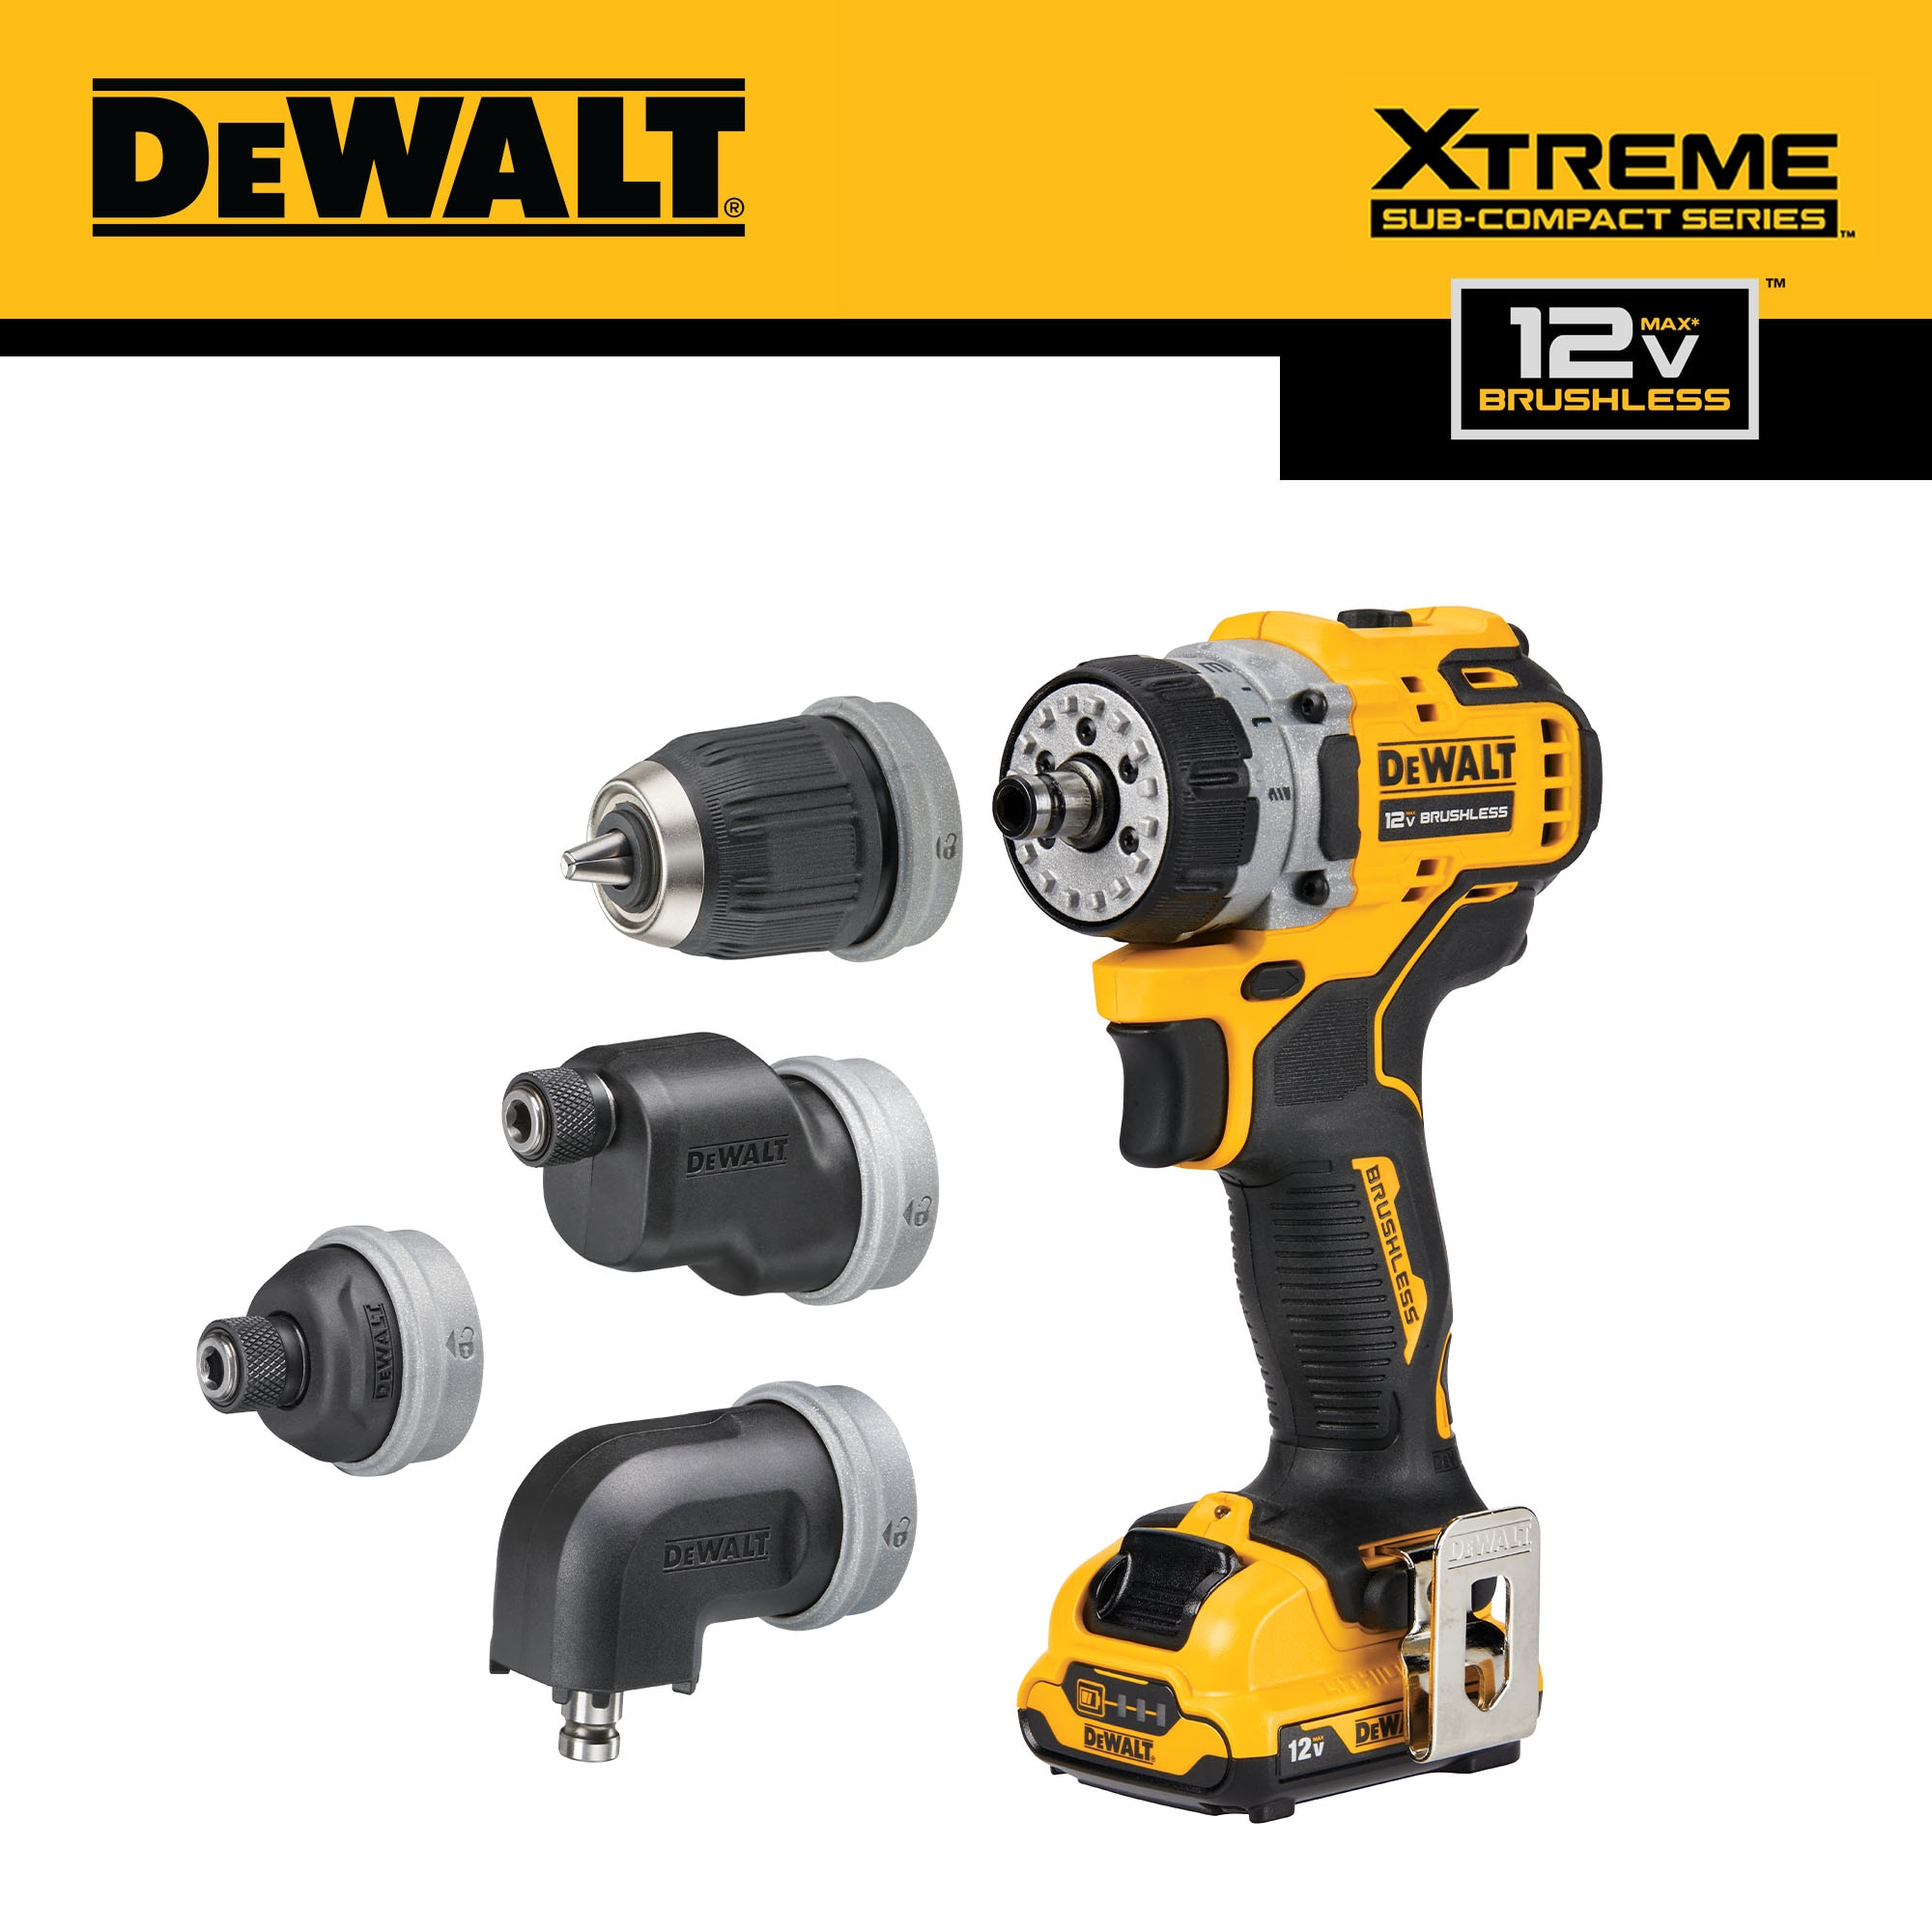 DEWALT Xtreme 5-In-1 Max 3/8-in Brushless Cordless Drill(1 Li-ion Battery and Charger Included) in the department at Lowes.com